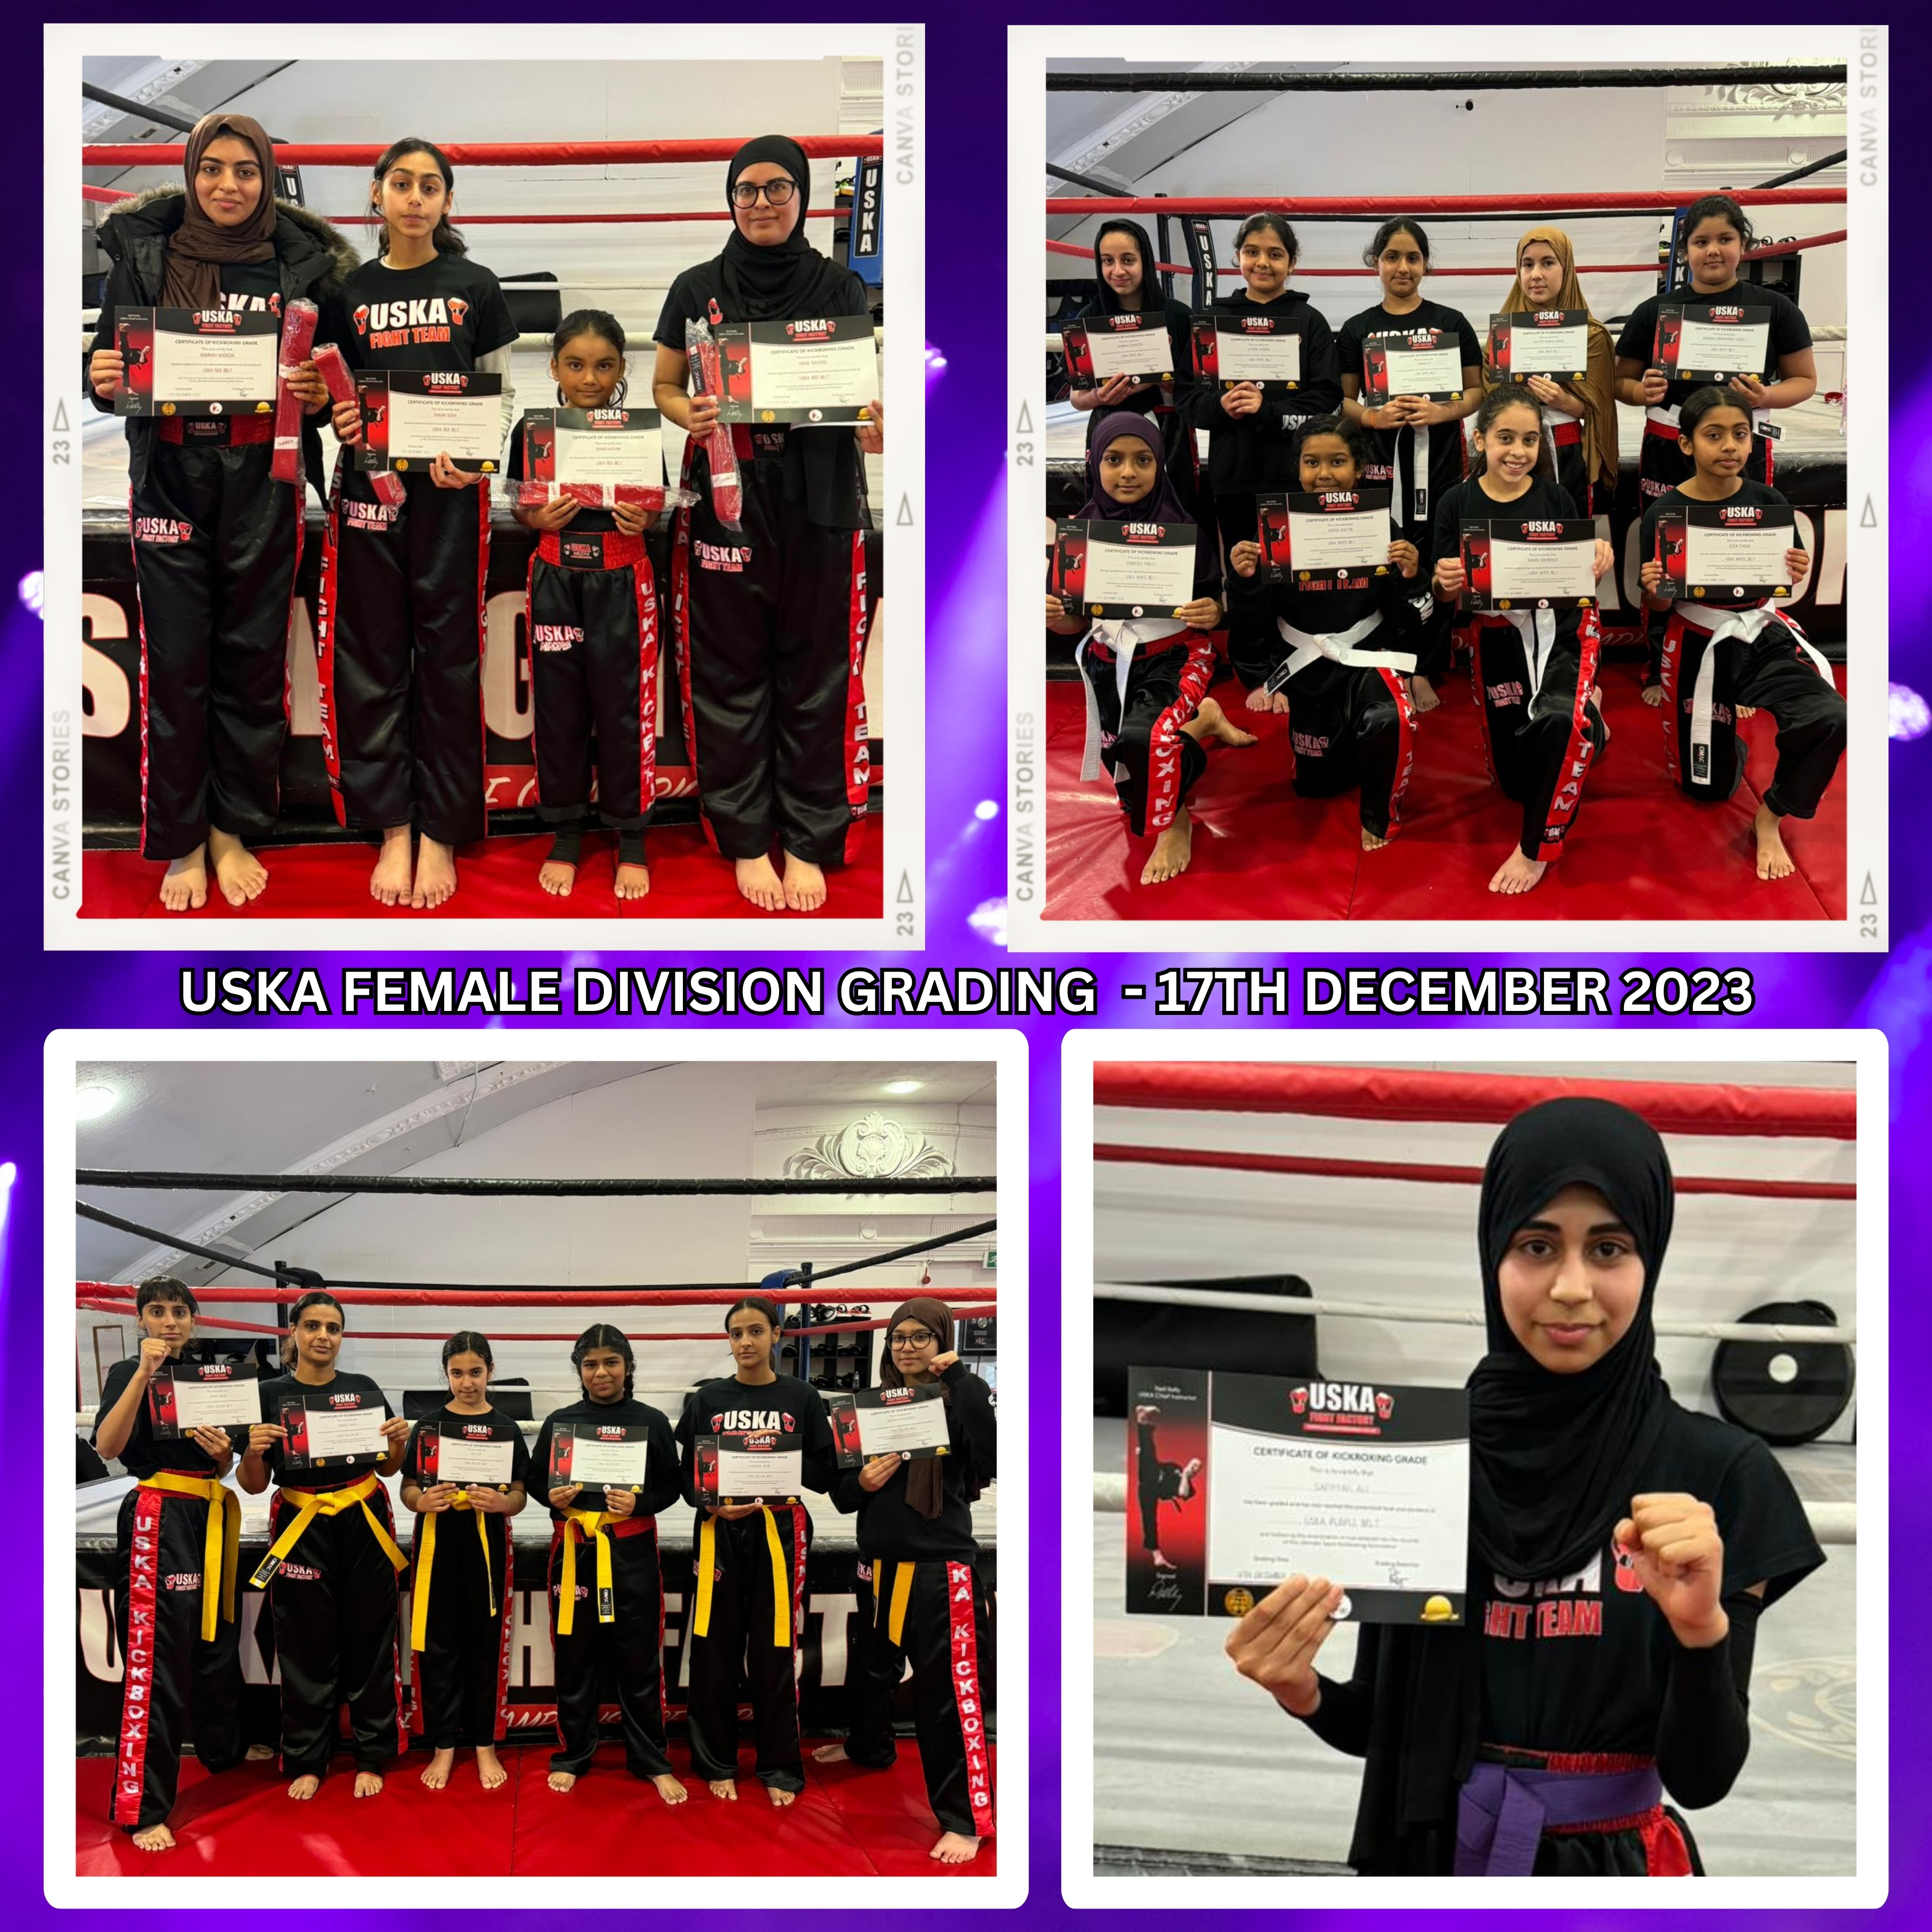 17-12-23 - Successful Weekend of Gradings complete with USKA Female Division Grading Examination.